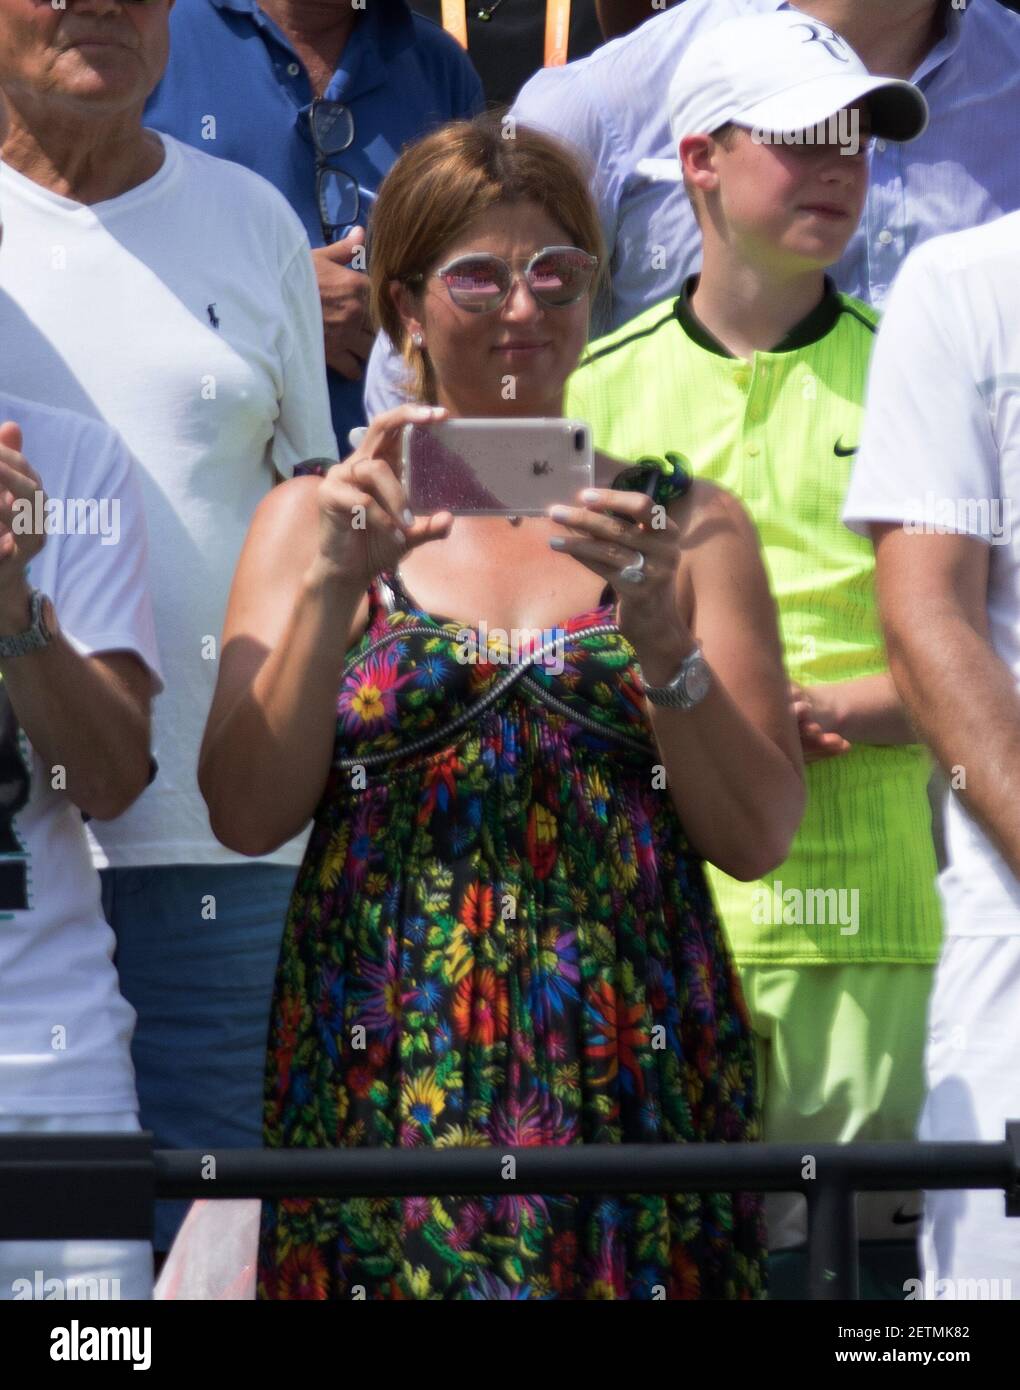 KEY BISCAYNE, FL - APRIL 02: Mirka Federer looks on during the men's final  match between Roger Federer of Switzerland and Rafael Nadal of Spain on day  14 of the Miami Open